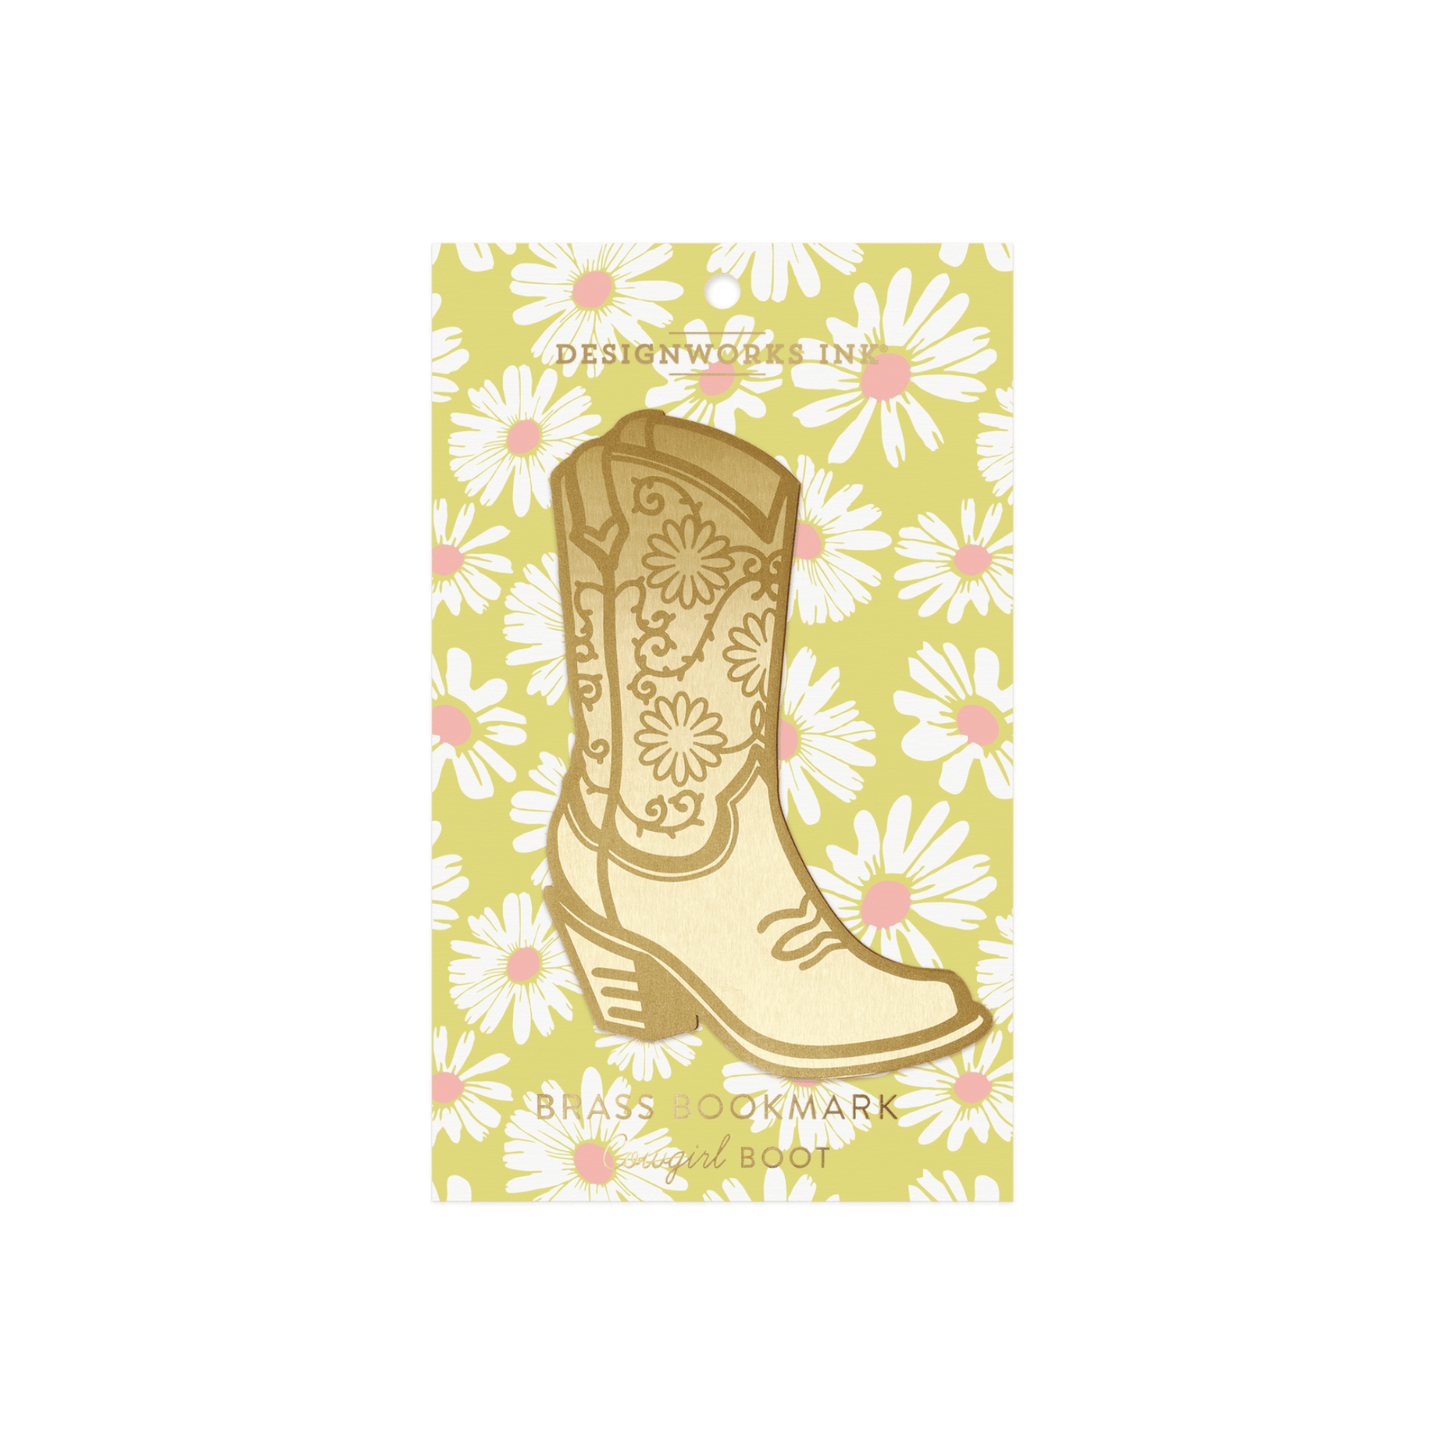 Brass Bookmark - Cowgirl Boot on flower print packaging and white background